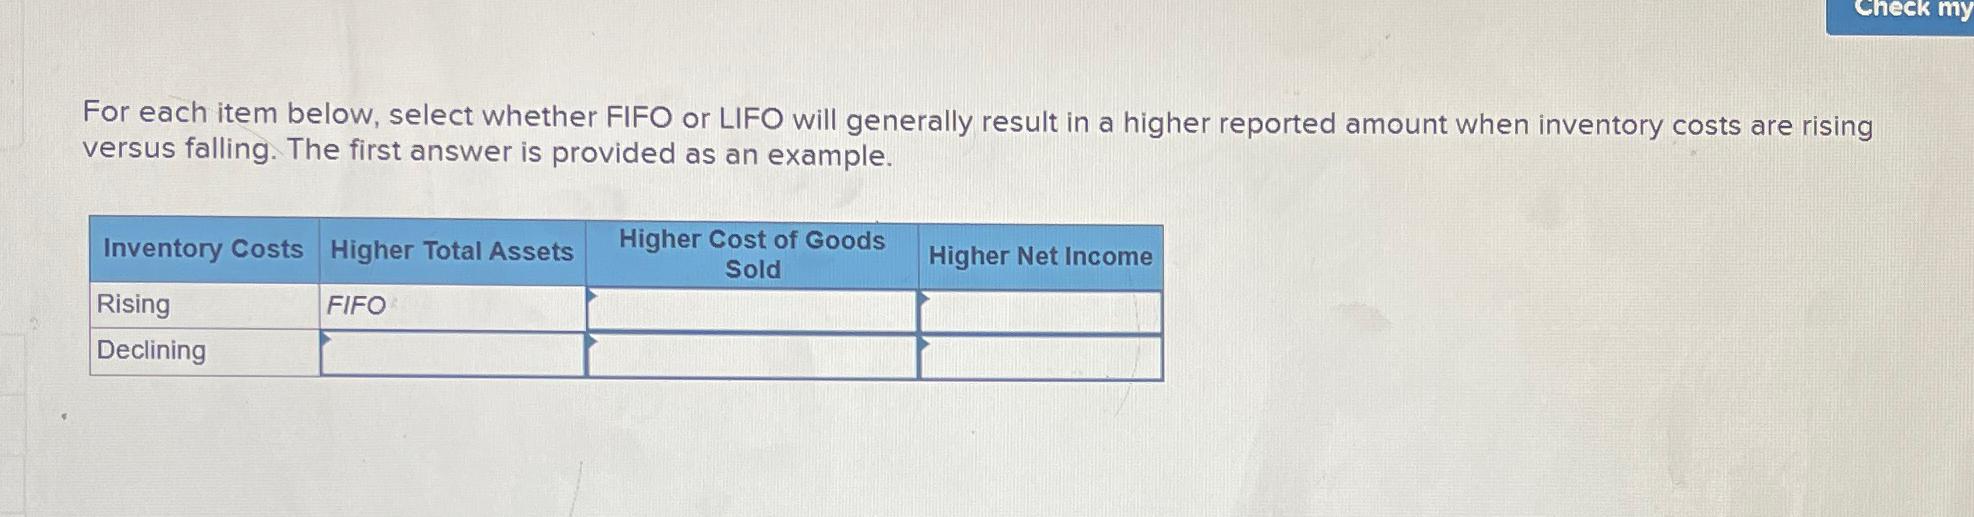 Solved For each item below, select whether FIFO or LIFO will